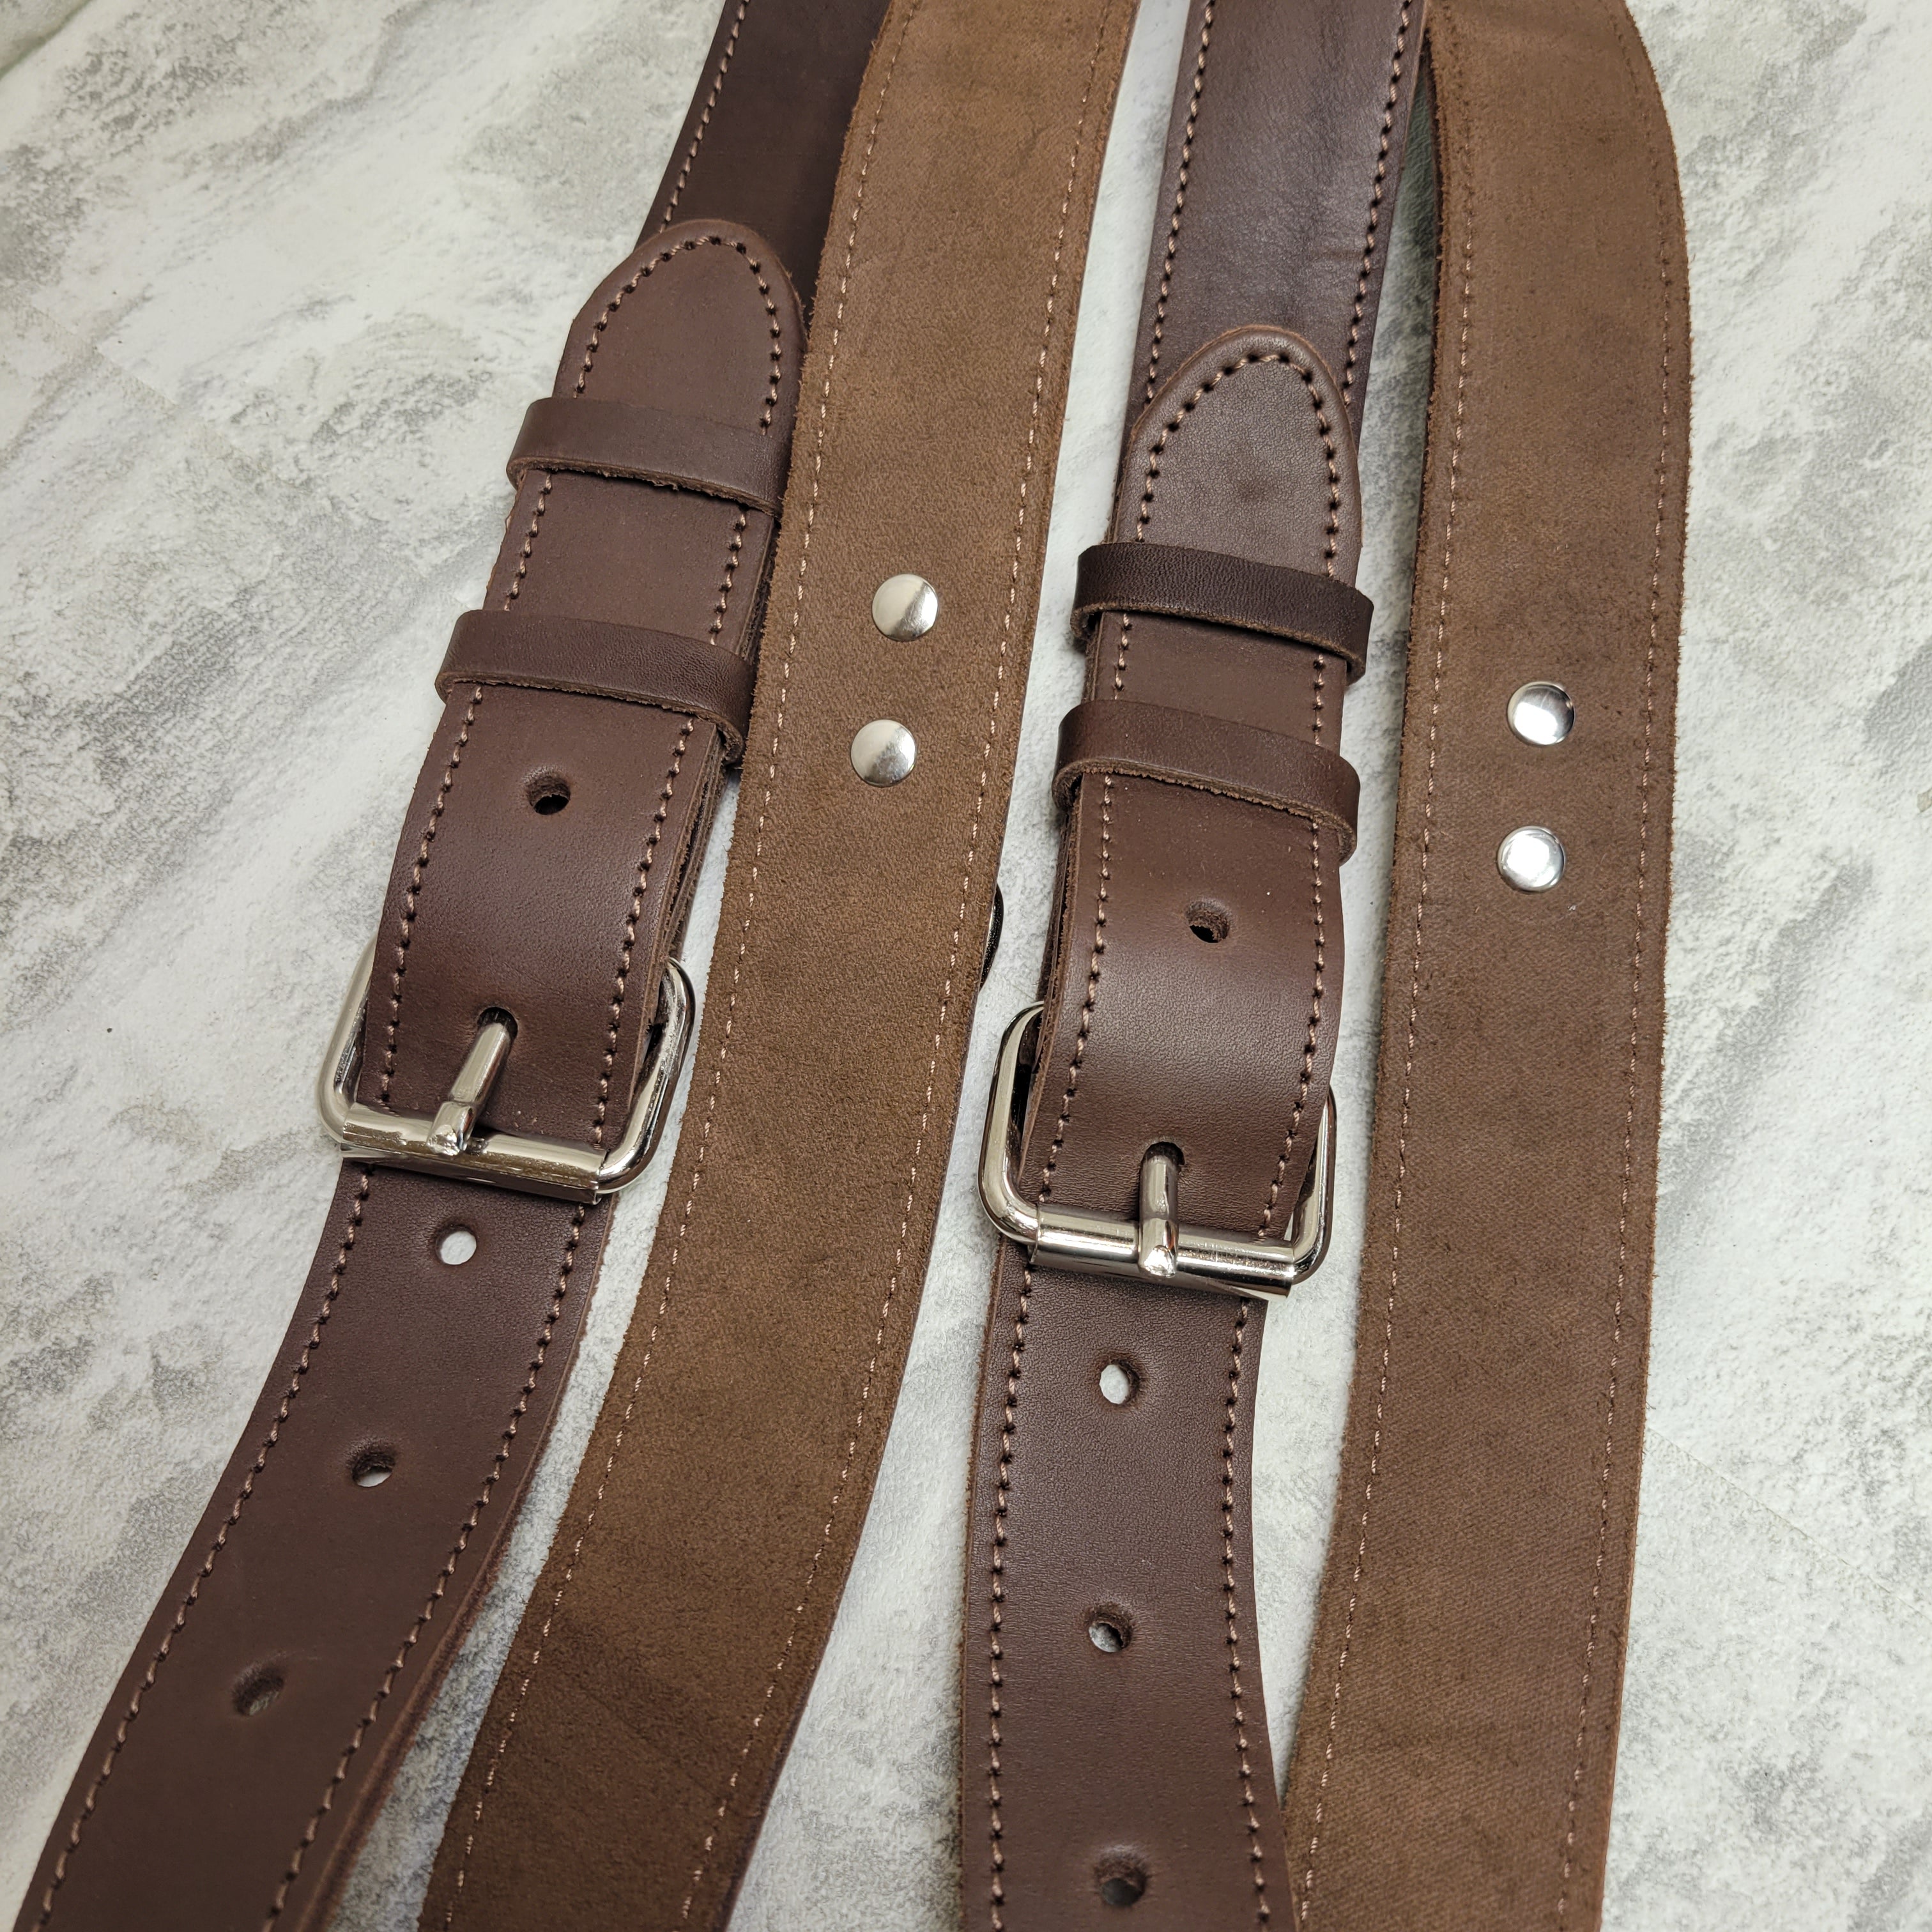 Dual Harness Two Cameras Shoulder Leather Strap DSLR/SLR by C Coiro